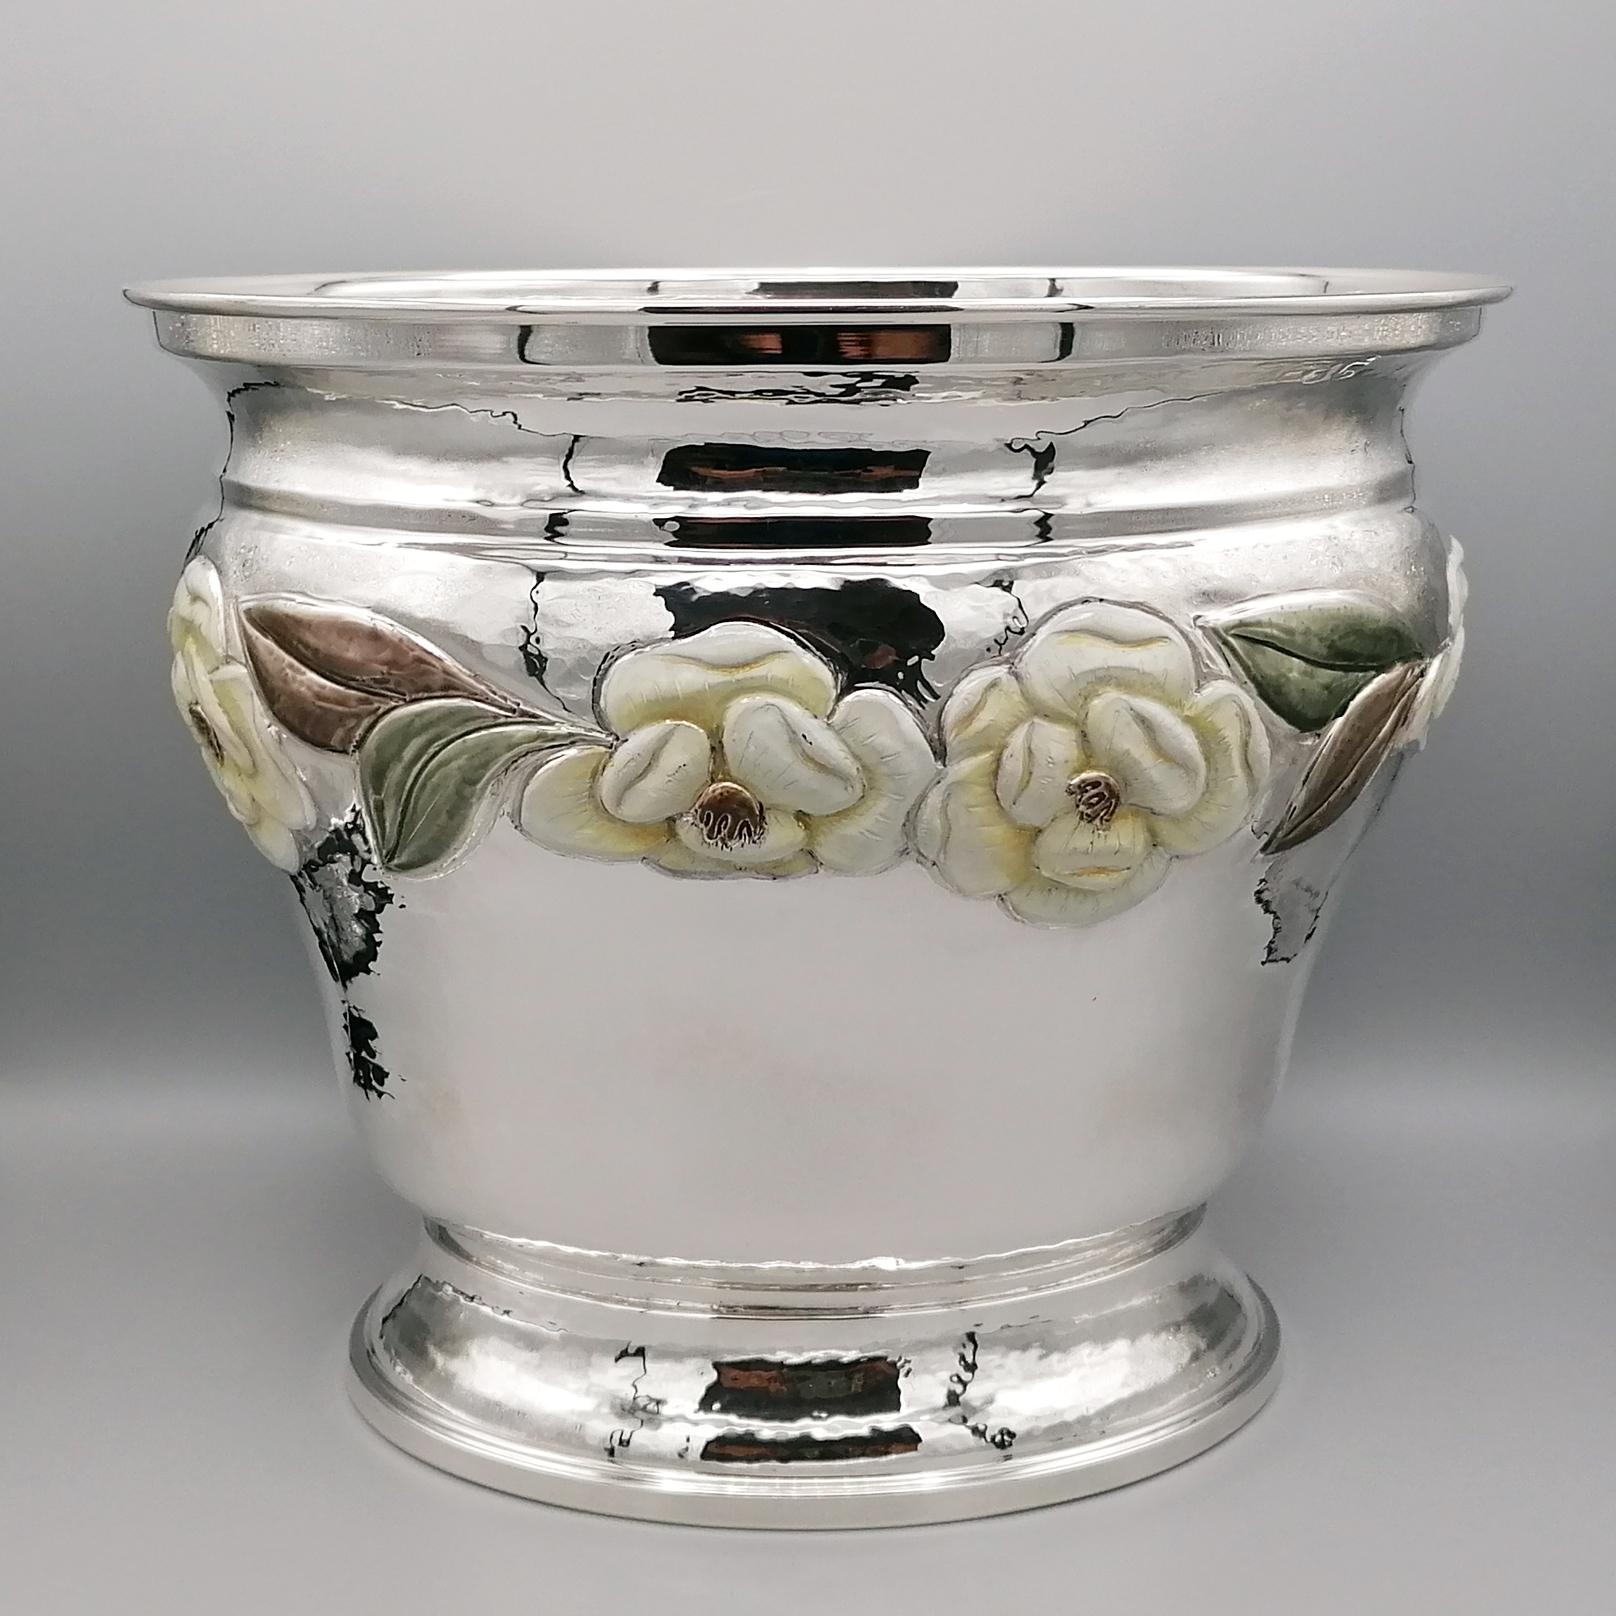 Oval shape solid sterling silver champagne bucket.
The bucket was made entirely by hand starting from a silver plate of adequate thickness, then having to emboss and chisel floral motifs.
An oval base was placed under the main body of the bucket